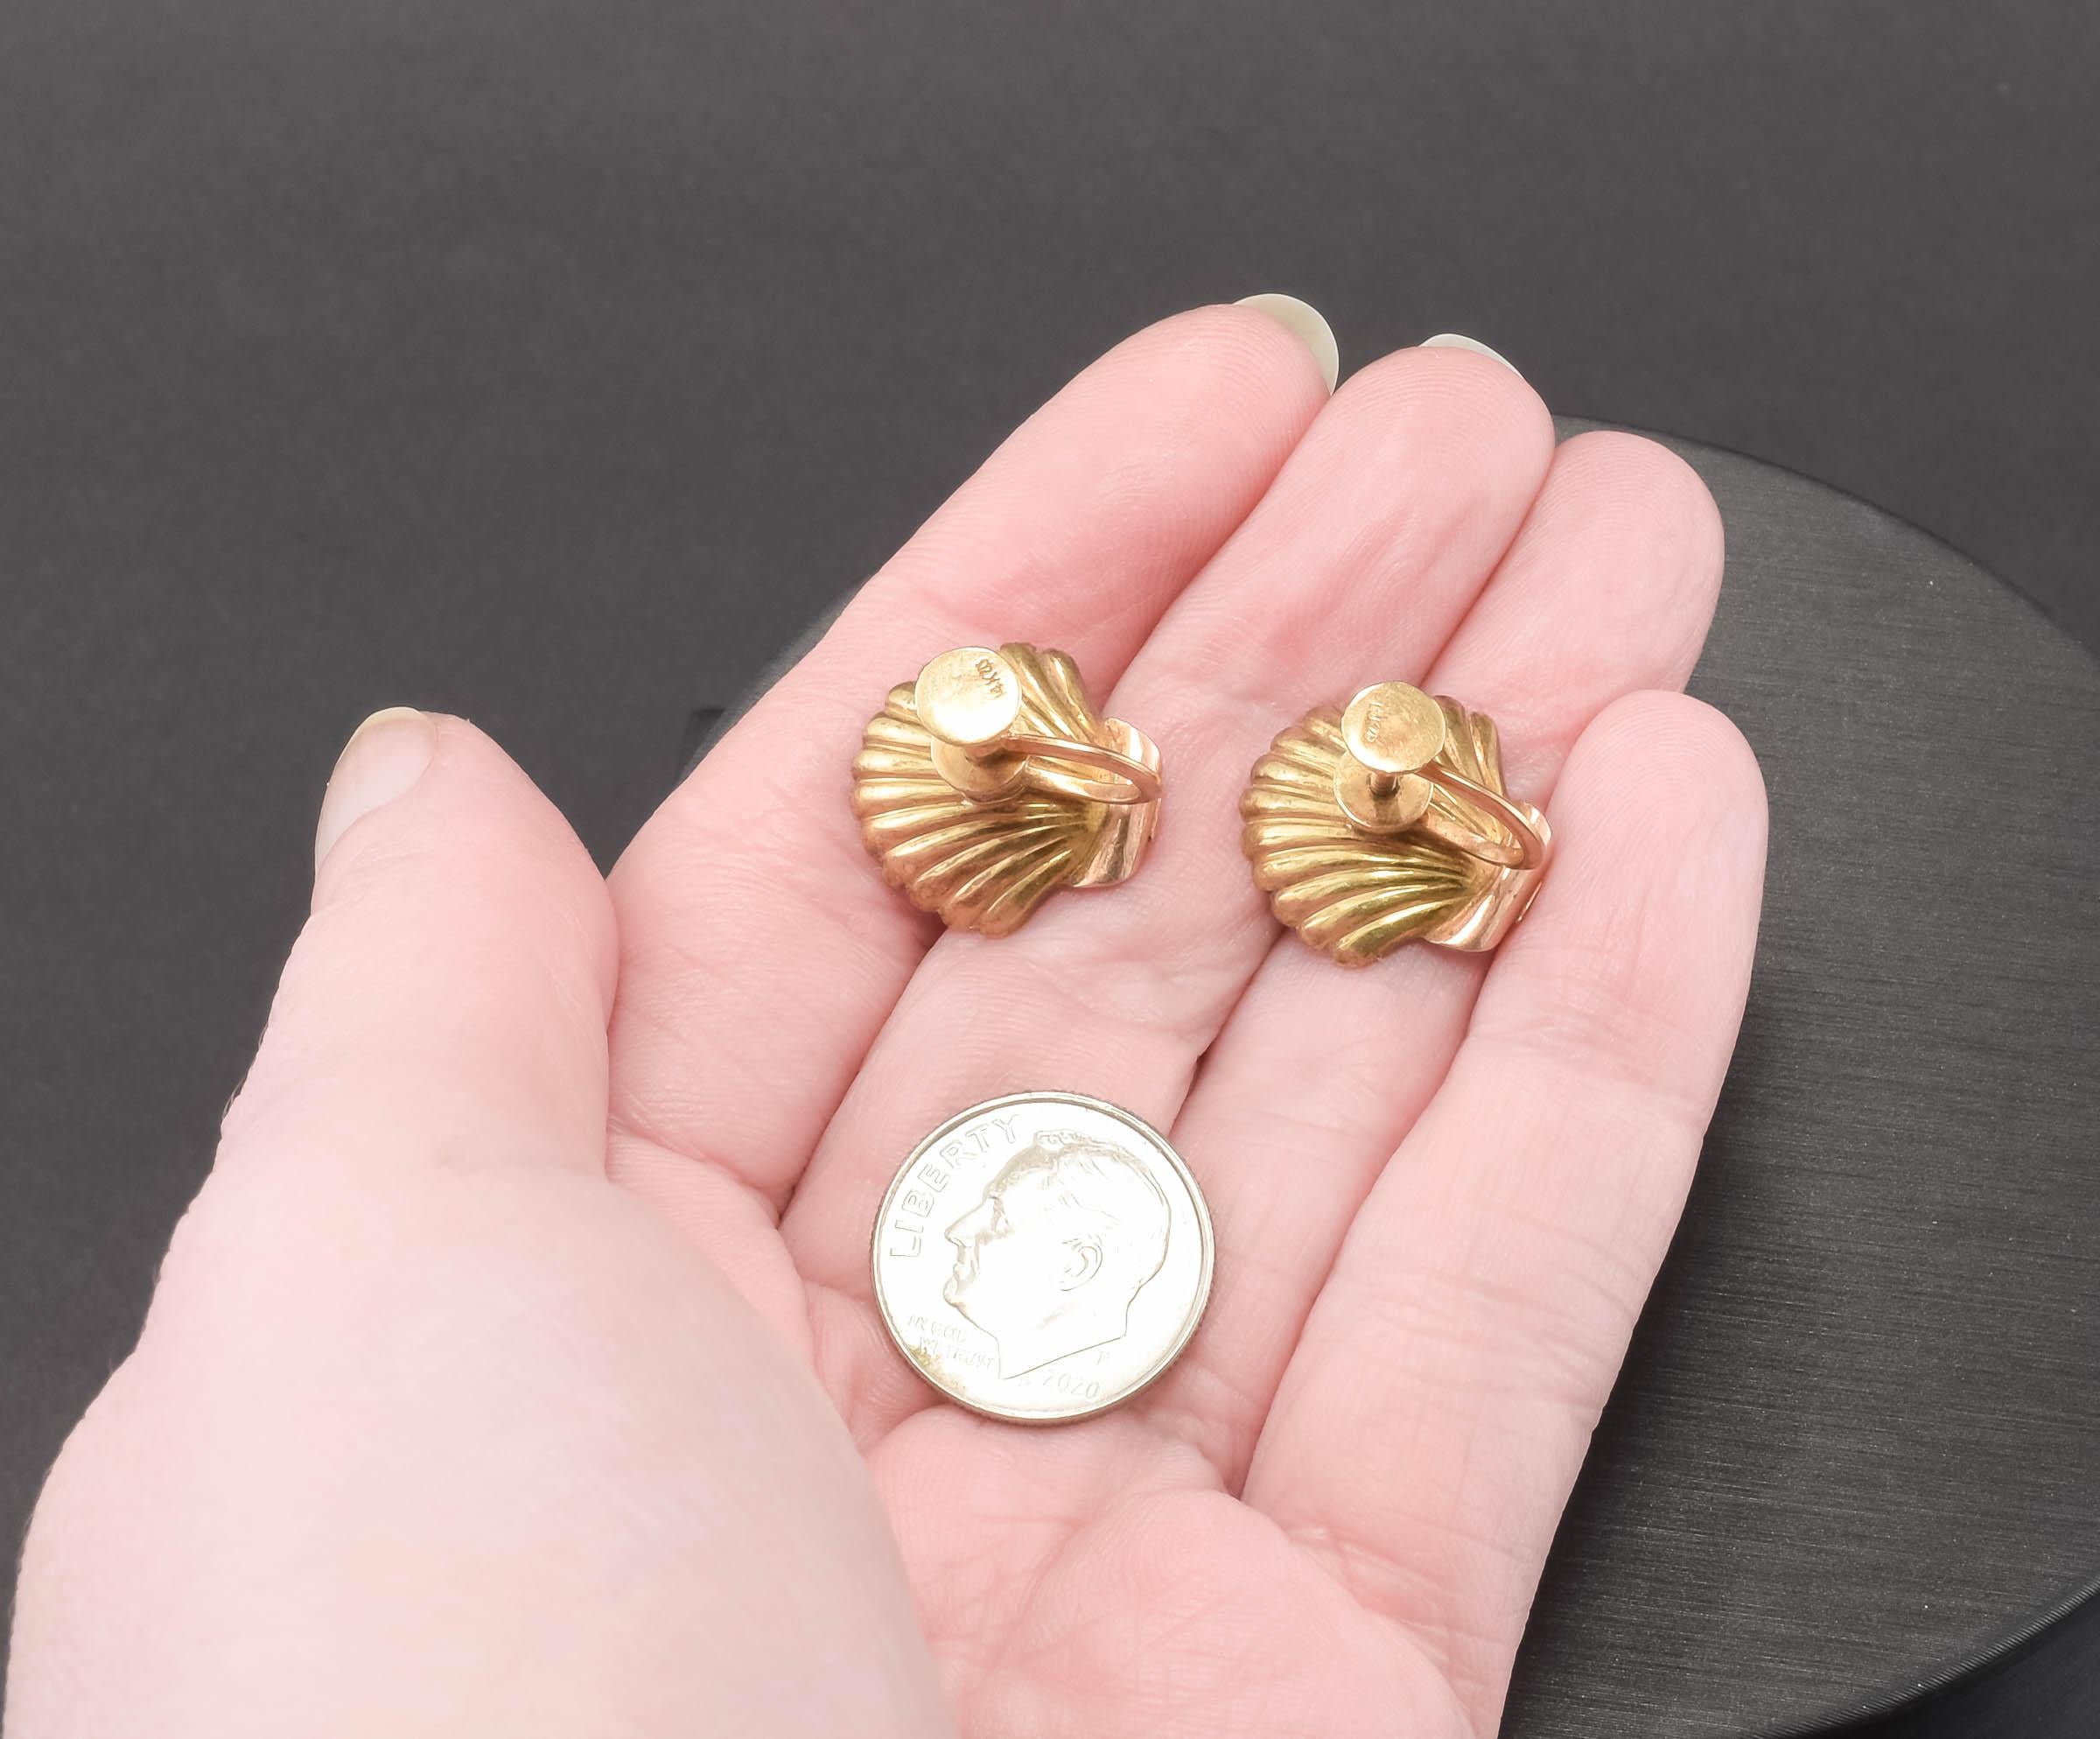 Antique 14K Gold Shell Earrings w Pearls by Sloan & Co. French Screw Back Style For Sale 4